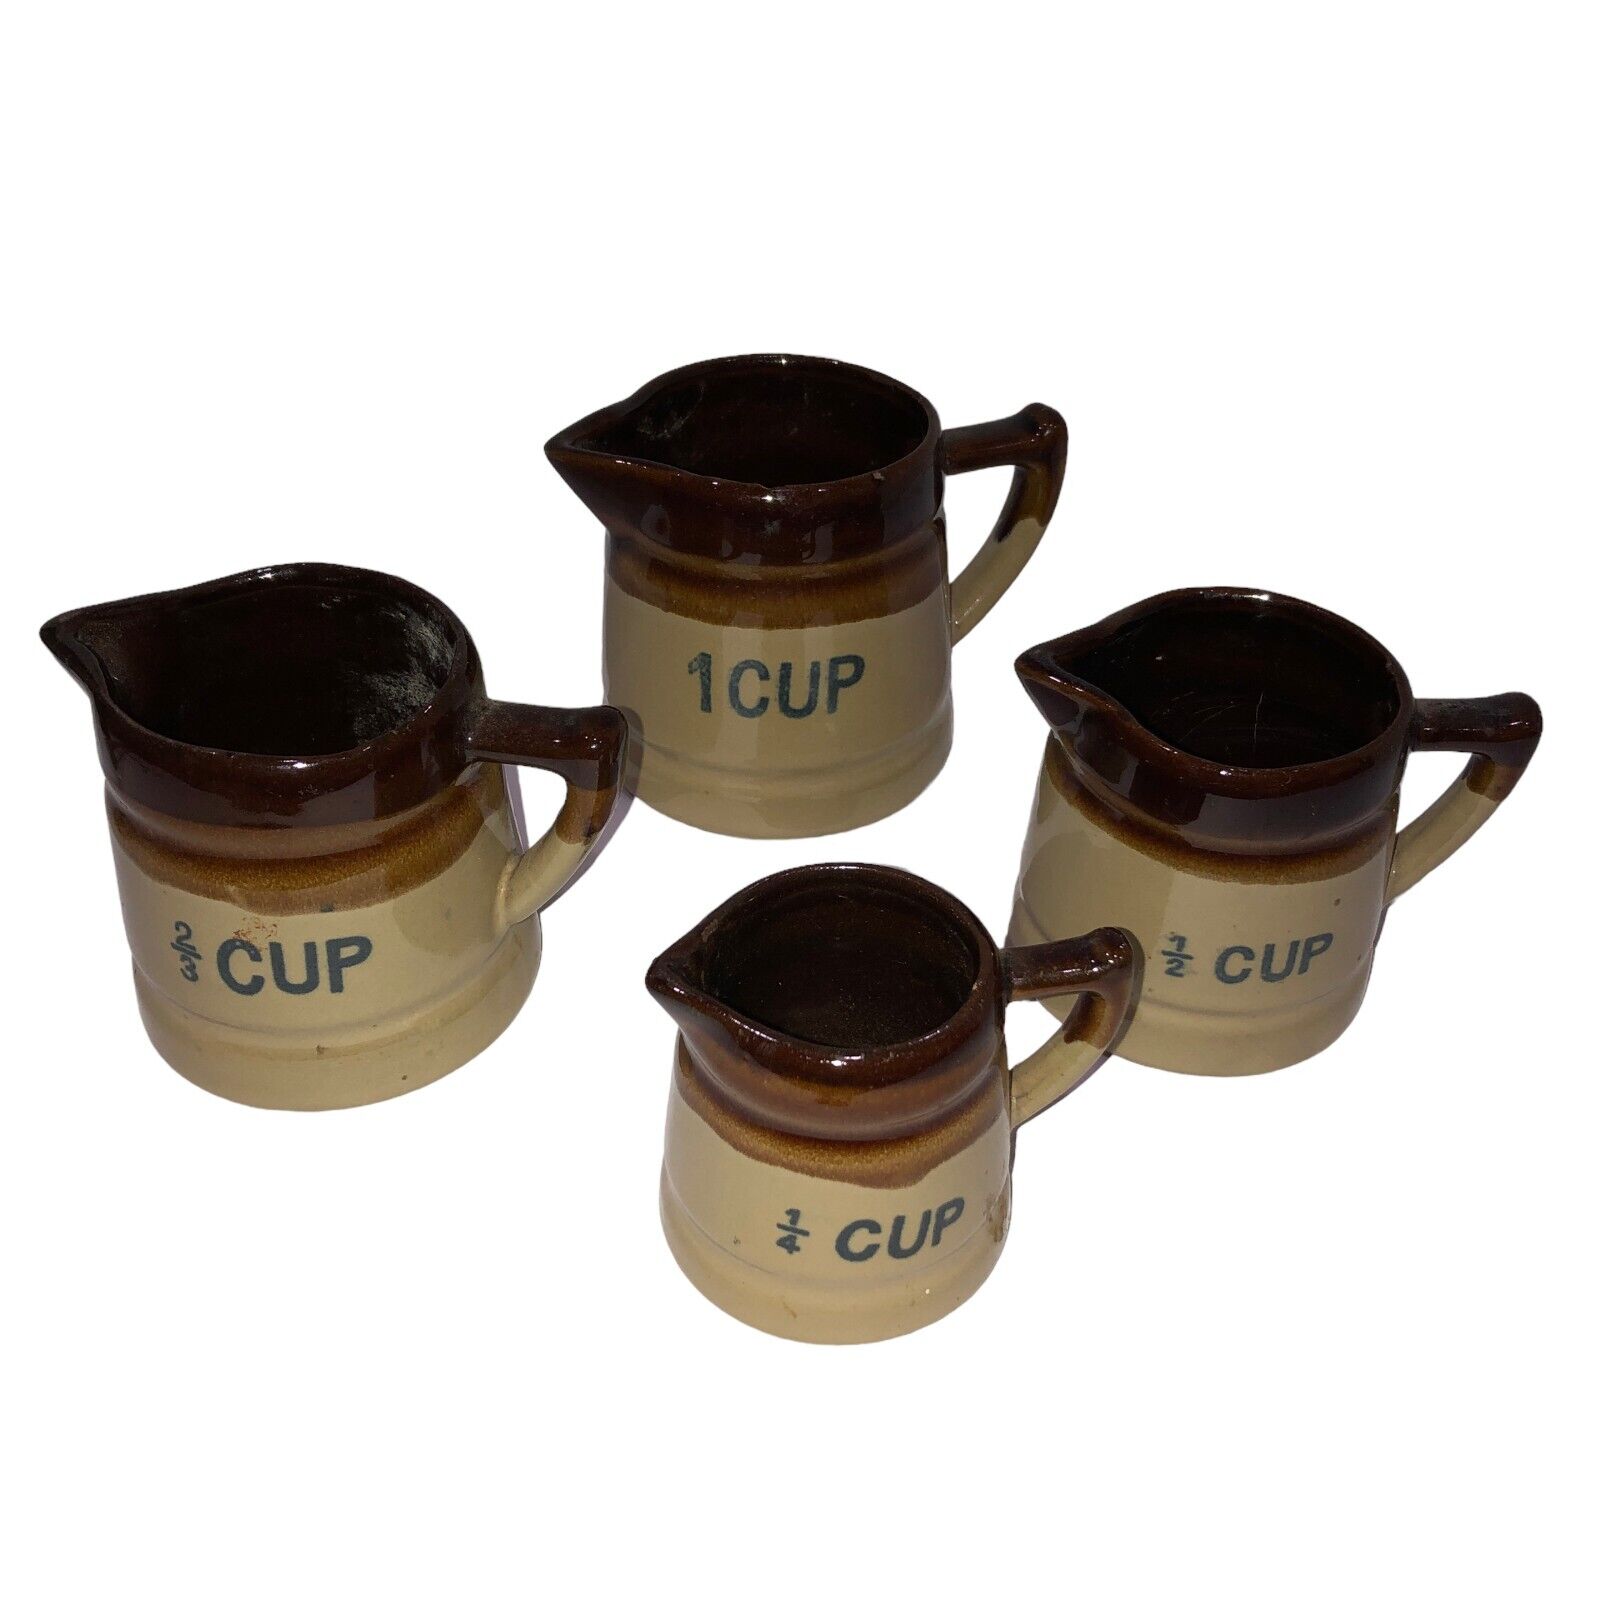 VTG Set of 4 Glazed Stoneware Measuring Cup Two Tone Brown Pitchers Cups Mugs